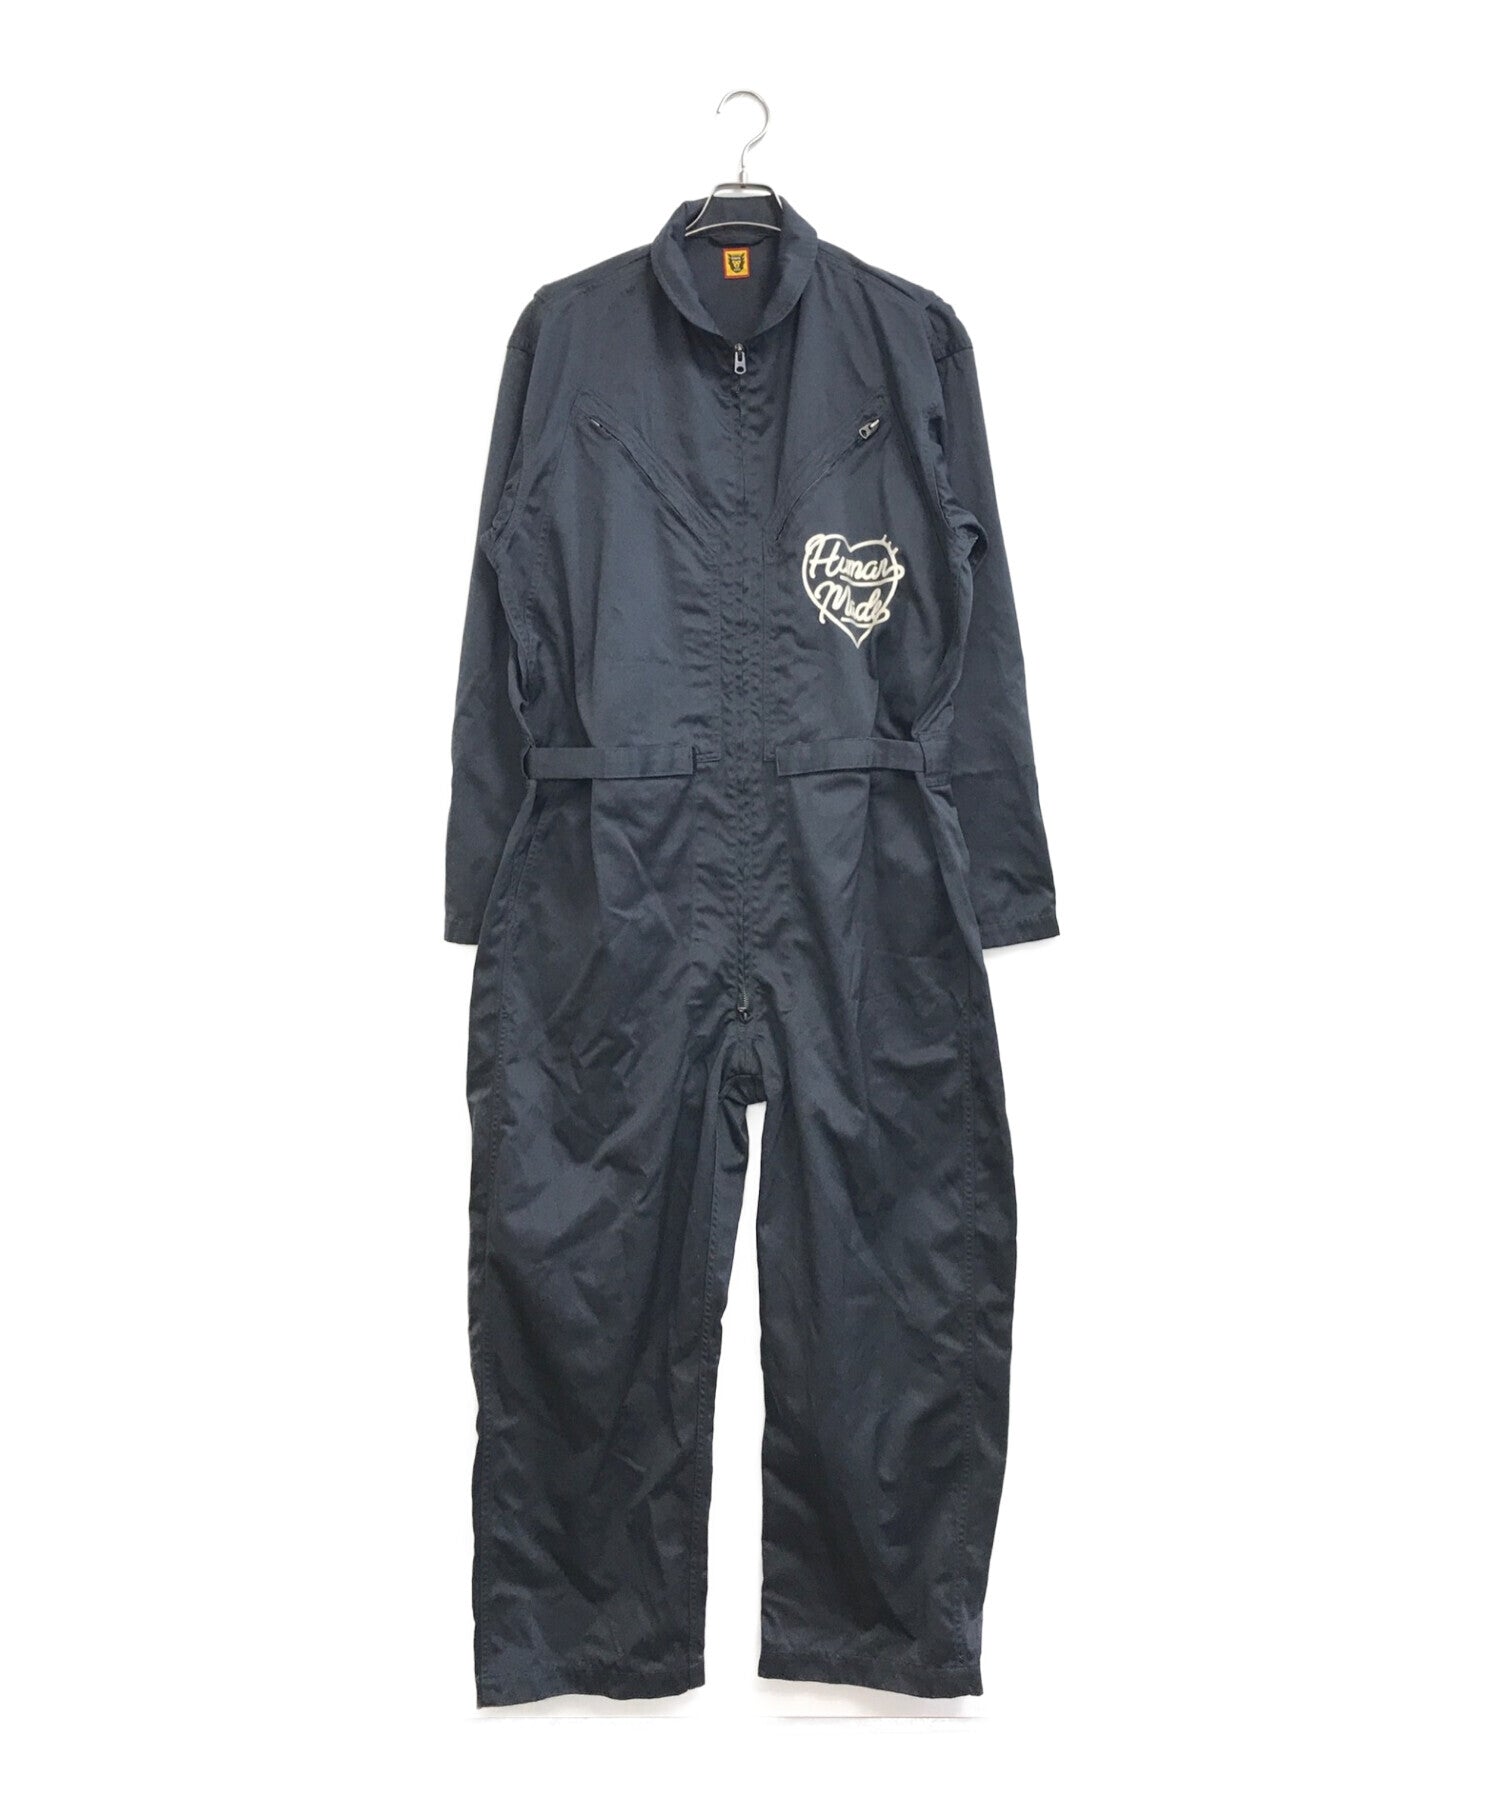 [Pre-owned] HUMAN MADE jumpsuit